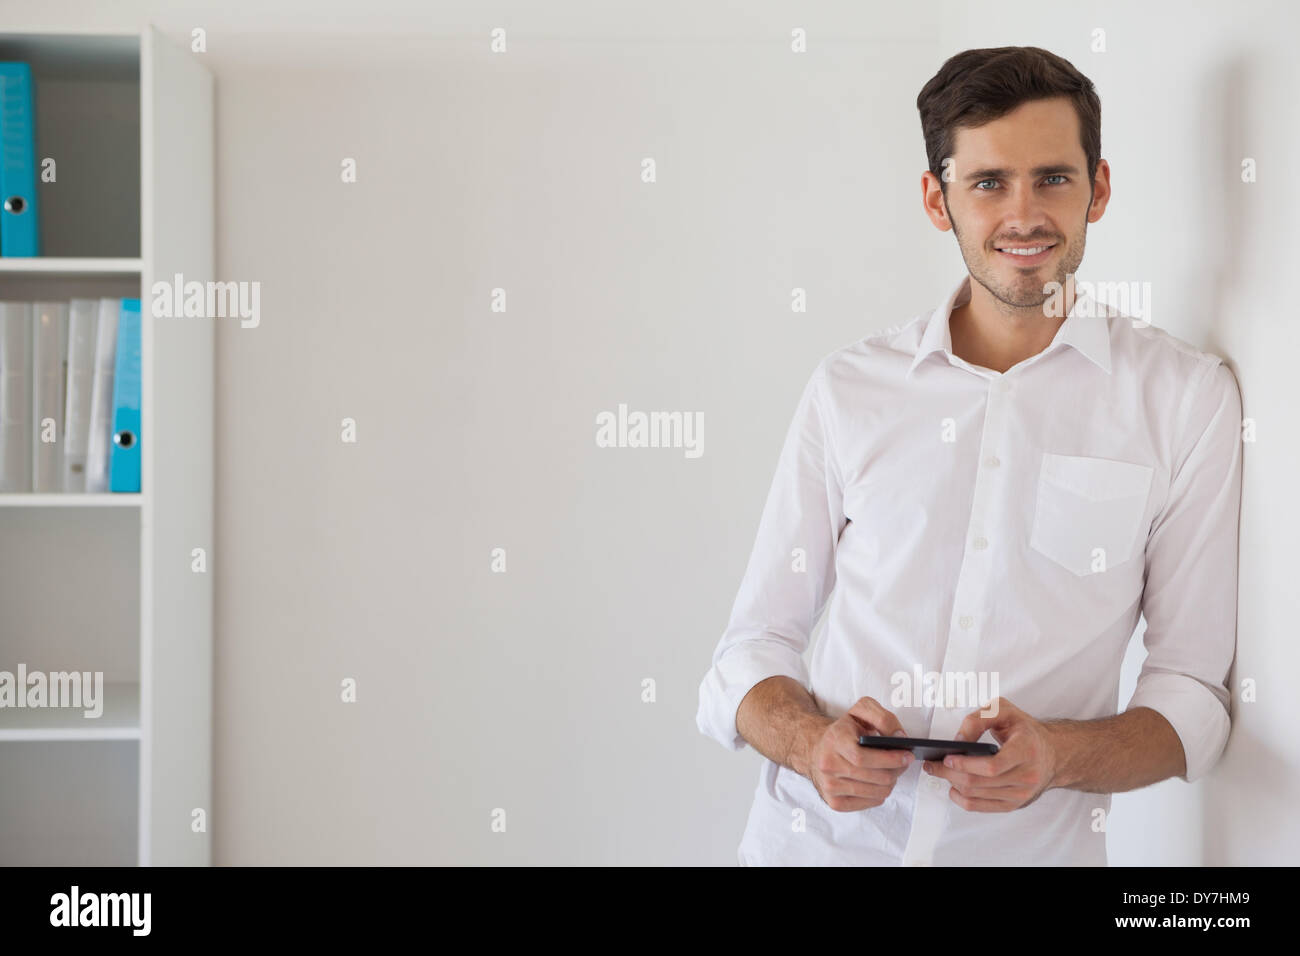 Casual businessman leaning against wall sending a text Stock Photo